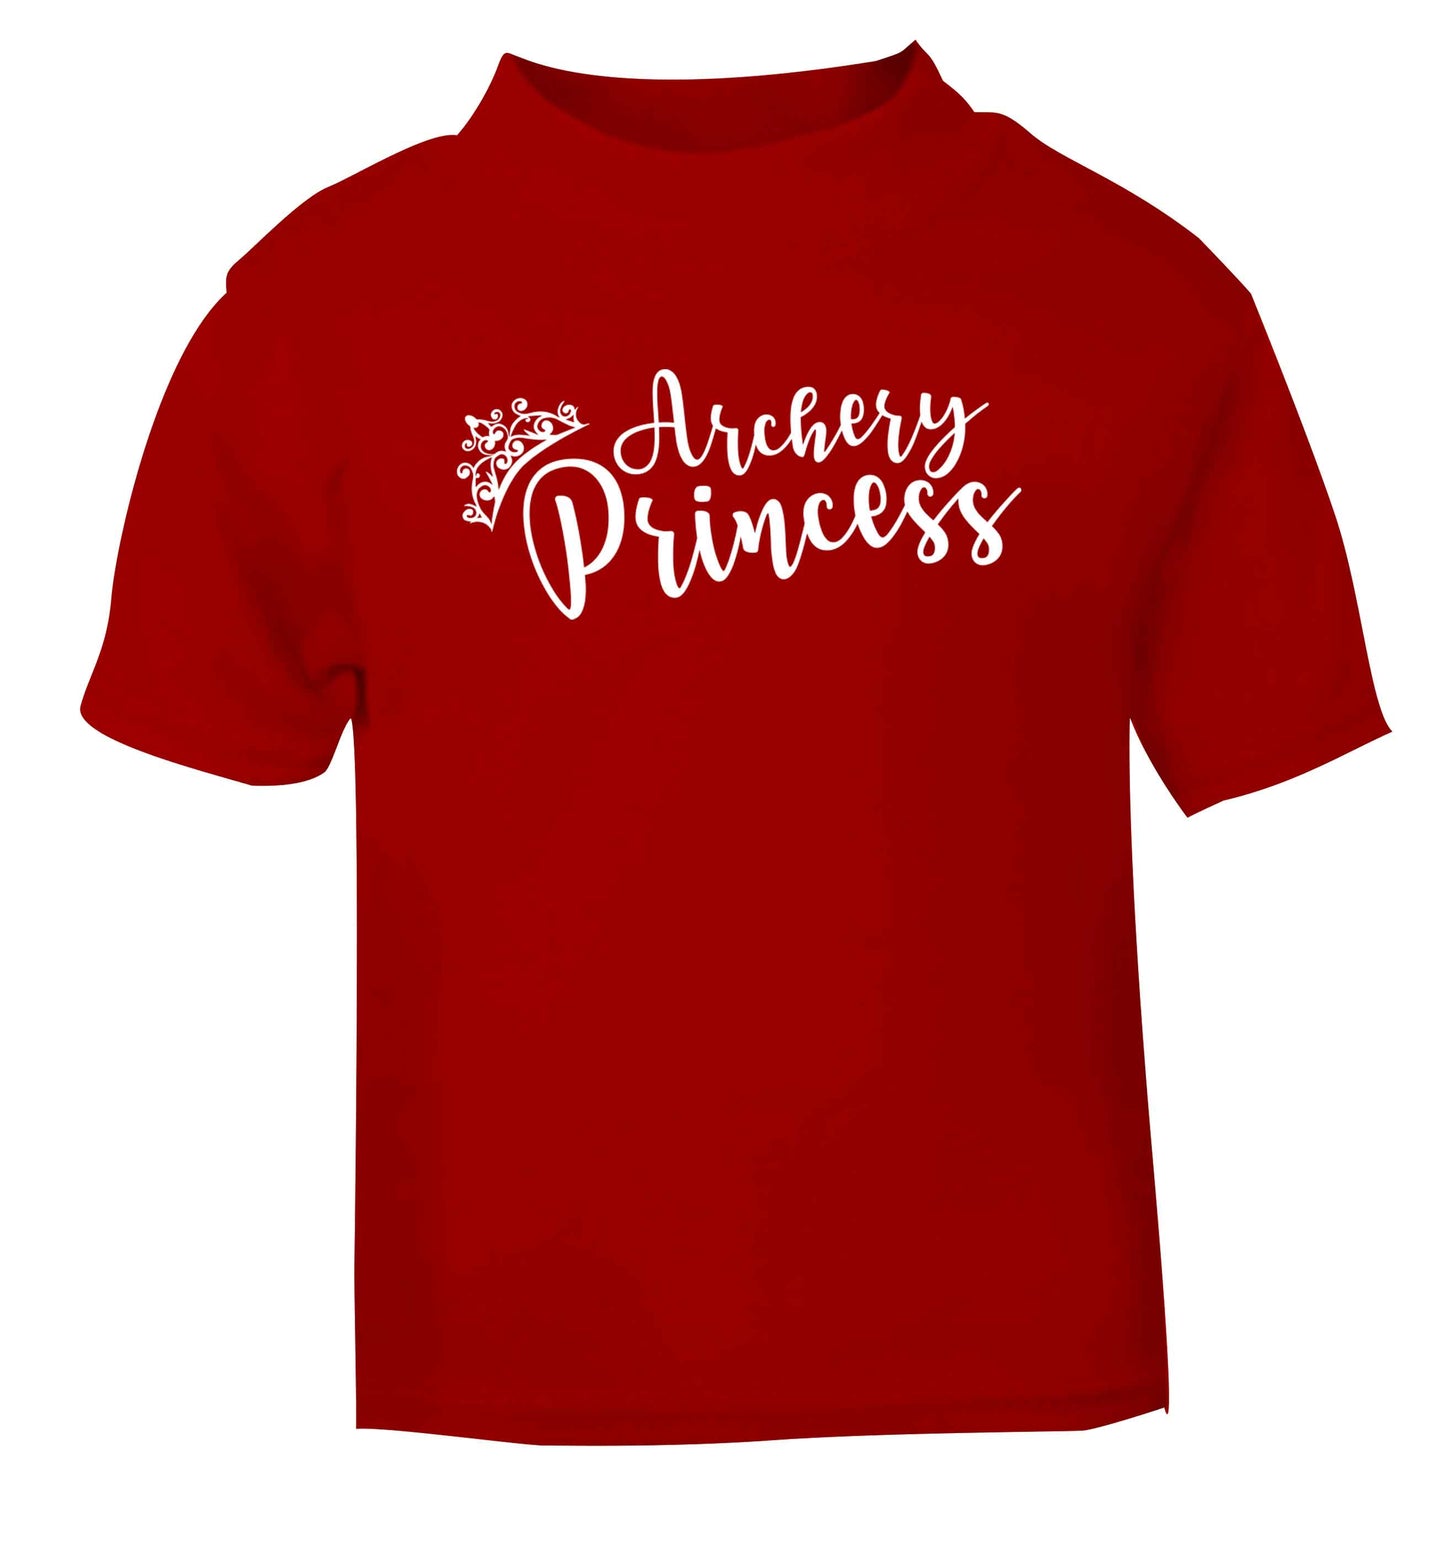 Archery princess red Baby Toddler Tshirt 2 Years